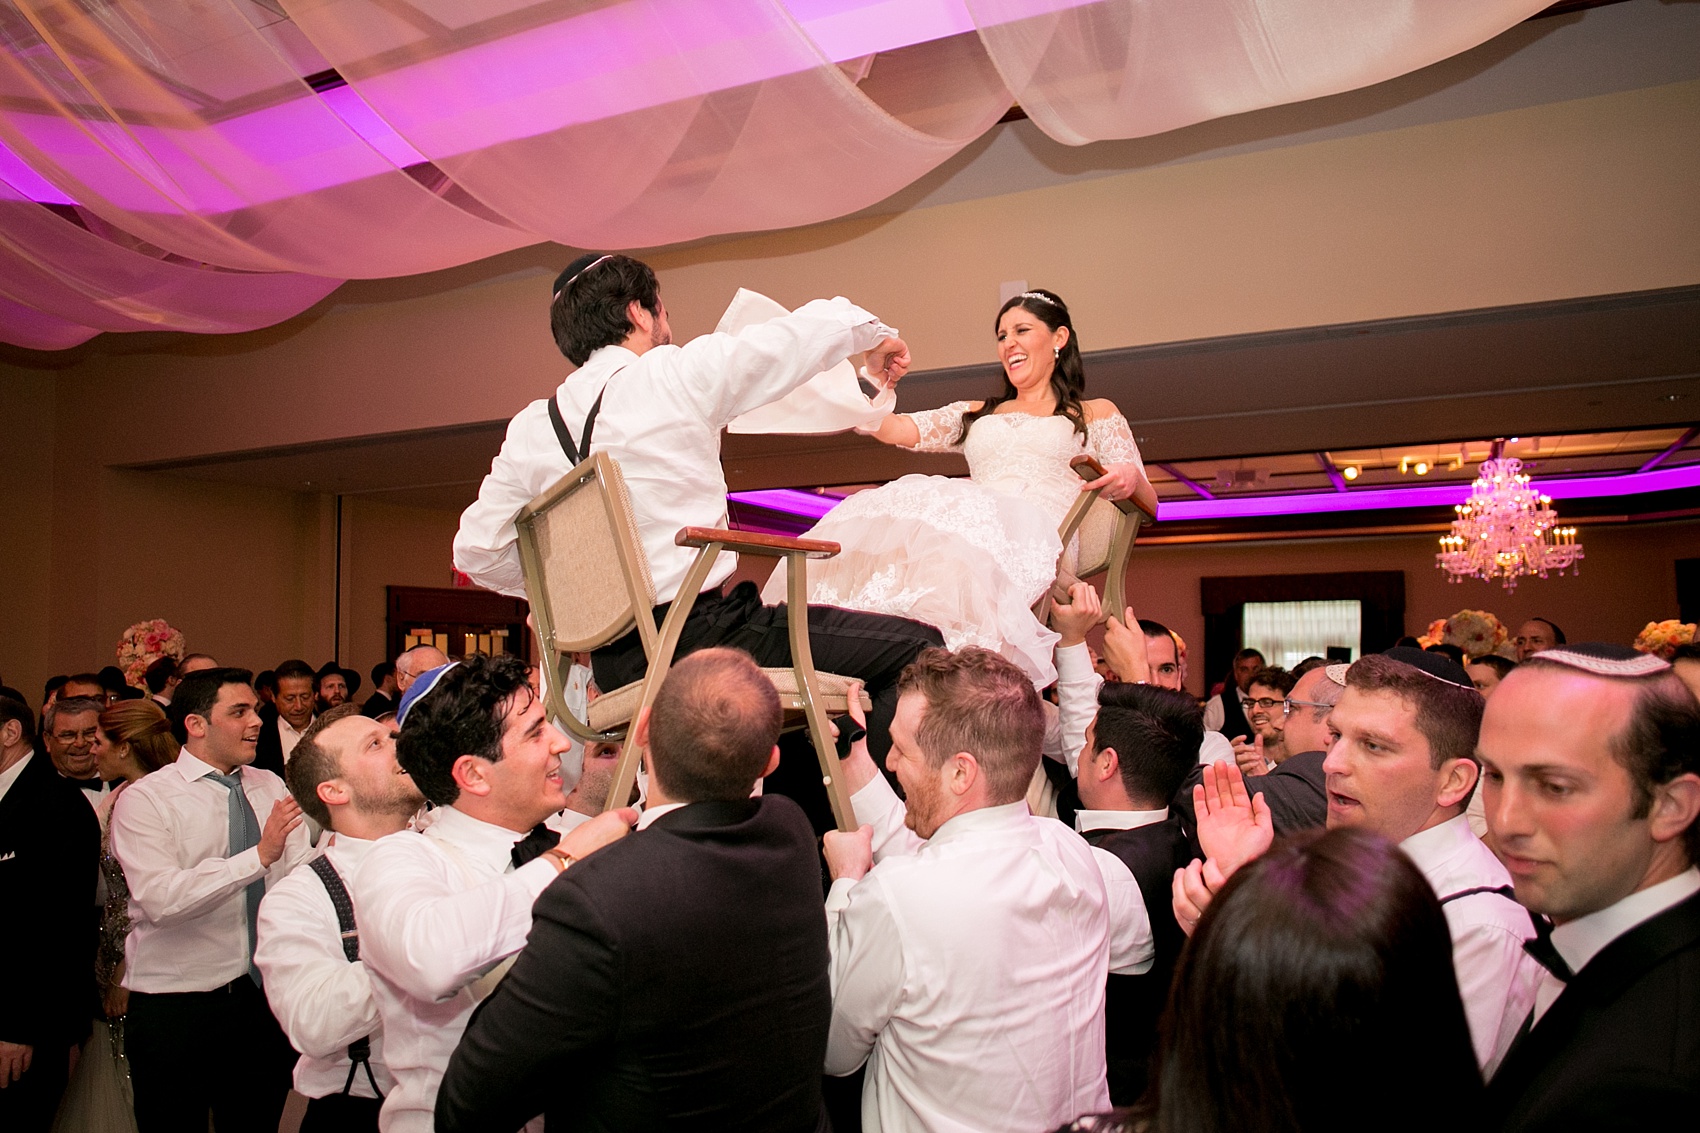 Mikkel Paige Photography photos of an elegant reception with pink and white details at Temple Emanu-El in Closter, NJ. The couple dances to the hora and is lifted in chairs! 